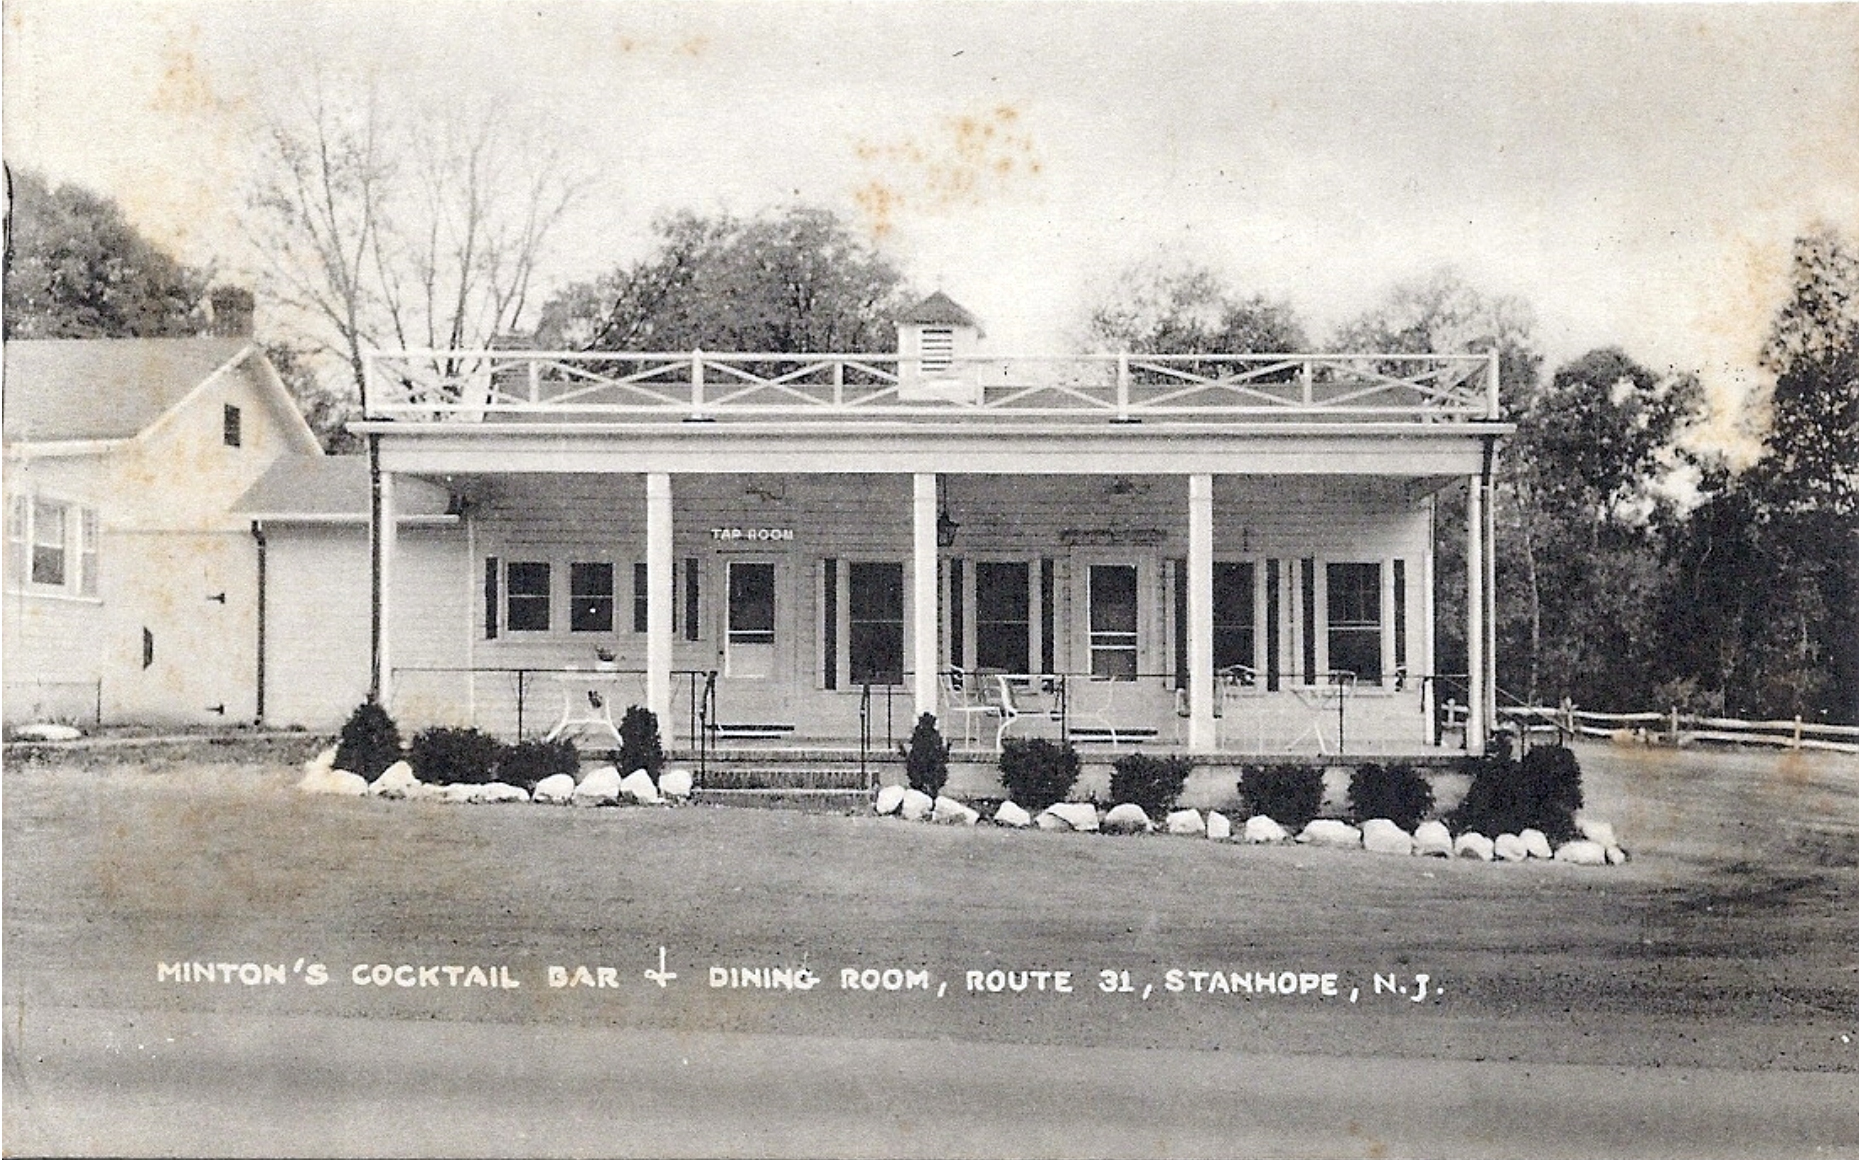 Stanhope - Mintons Cocktail Bar and Dining Room - undated